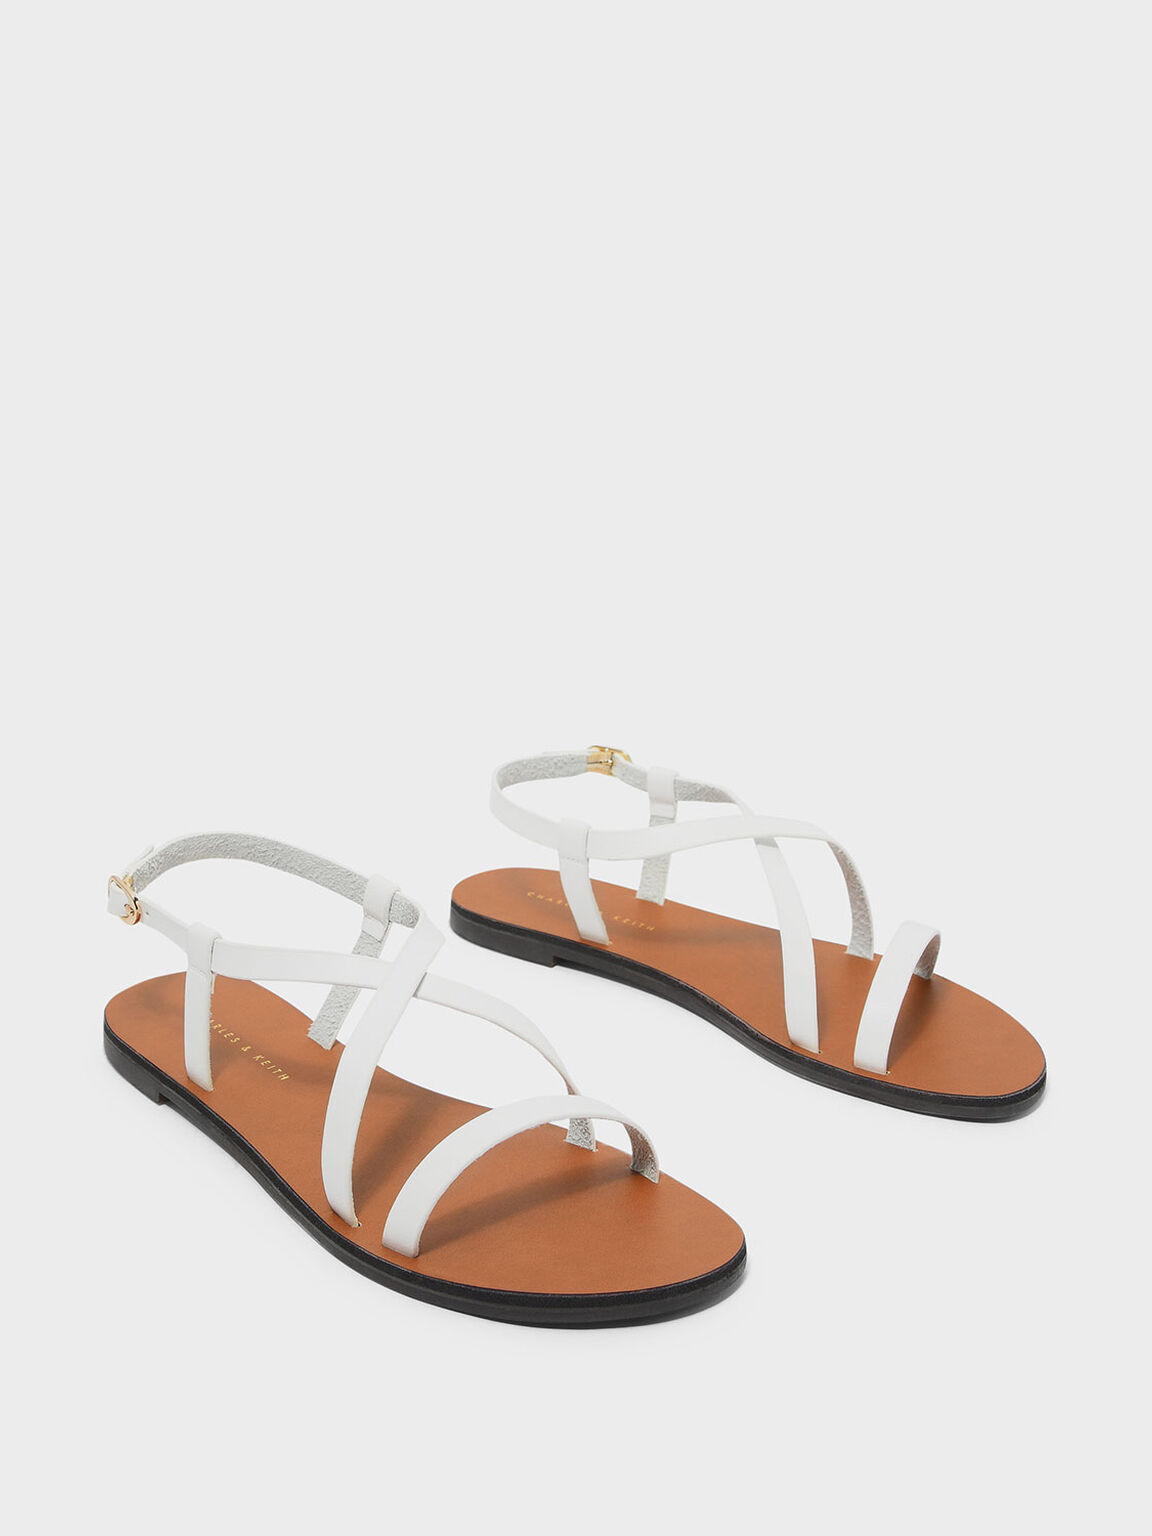 White Criss Cross Sandals - CHARLES & KEITH US